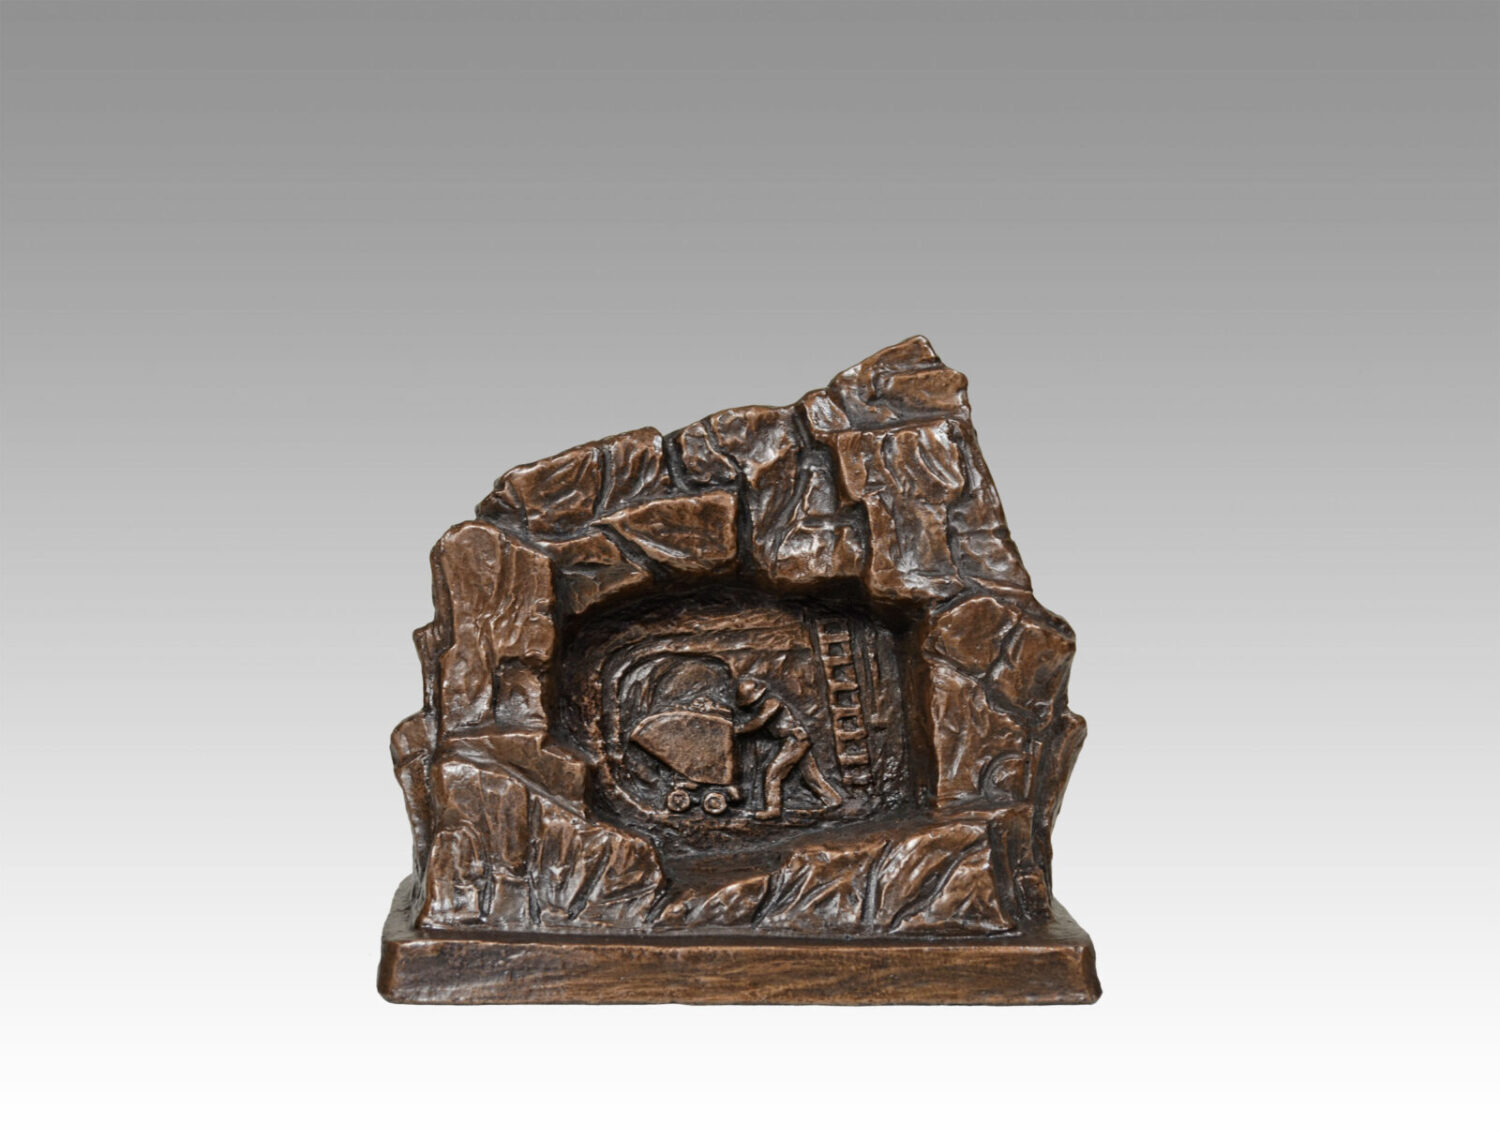 Gallery, Rock Scene with Pushing Ore Sculptural Relief, $175 CAD, Metal Infused, 6” L x 6" H, Pushing Ore Relief Ed.80, Mining Sculpture of a rock with a sculptural relief of a Miner pushing an ore cart inside, Sculptor Tyler Fauvelle